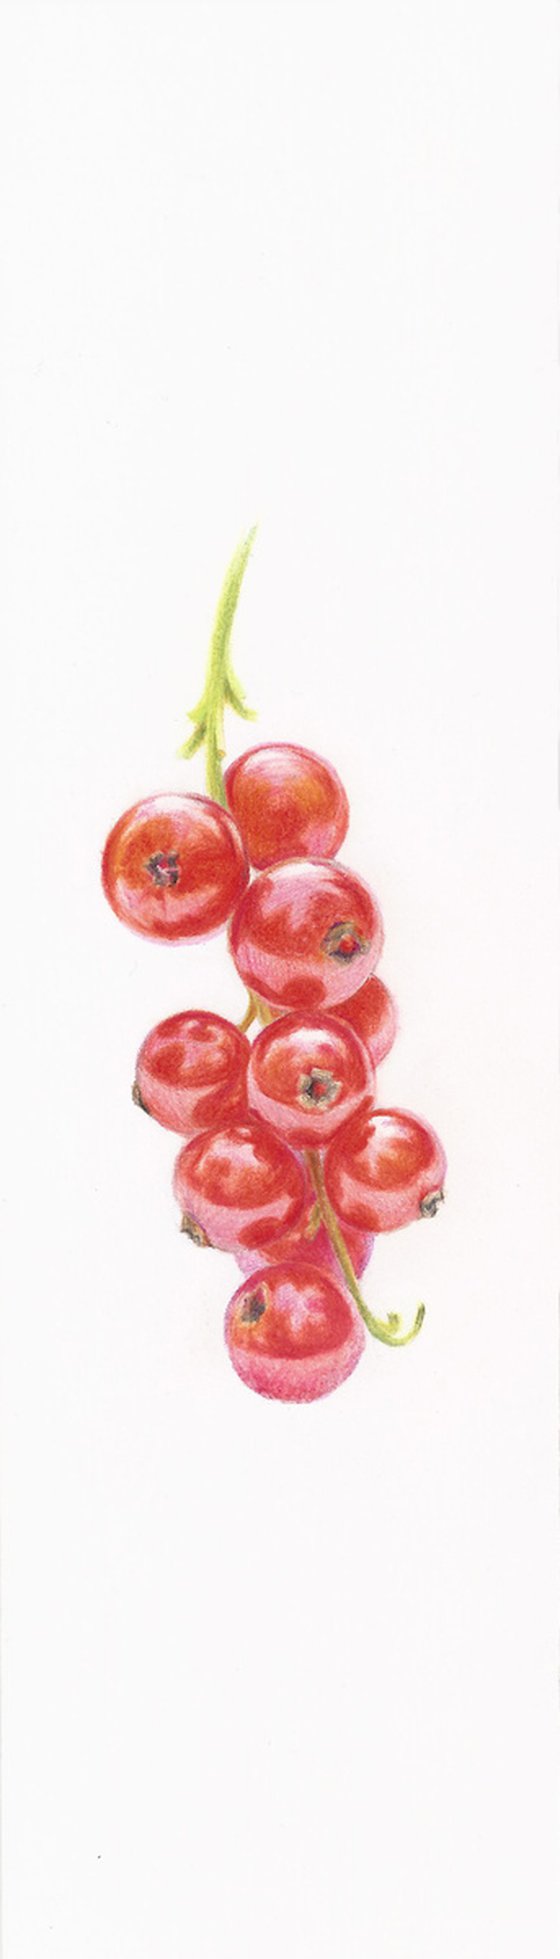 My Wild Berries as Bookmarks - The Red Currant